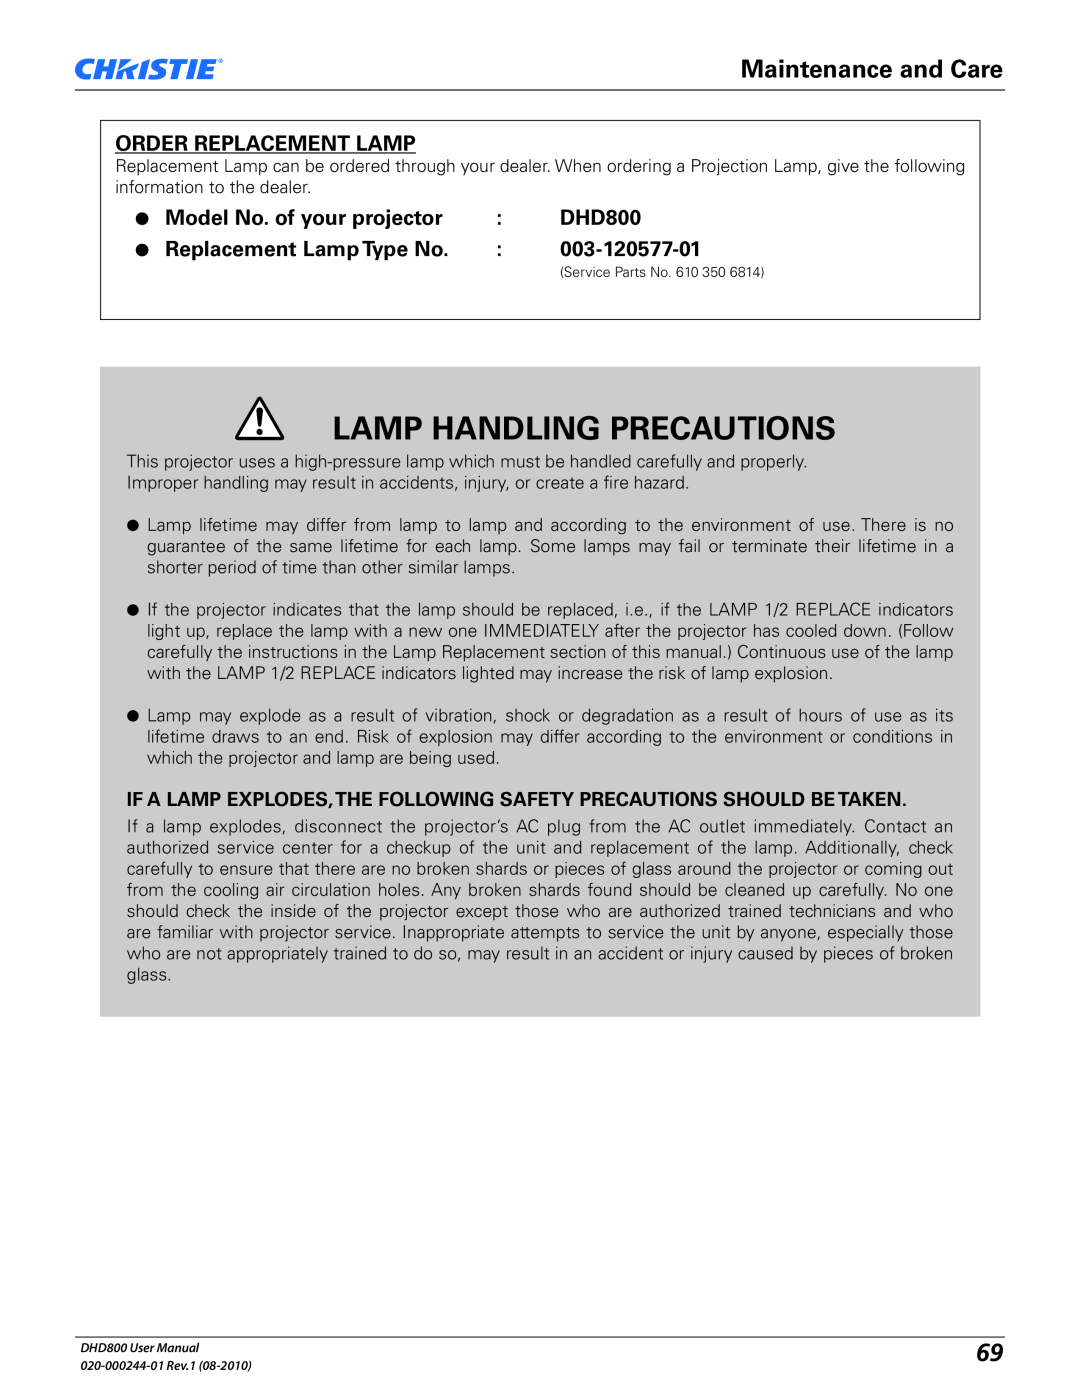 Christie Digital Systems DHD800 Lamp Handling Precautions, Maintenance and Care, Order Replacement Lamp, 003-120577-01 